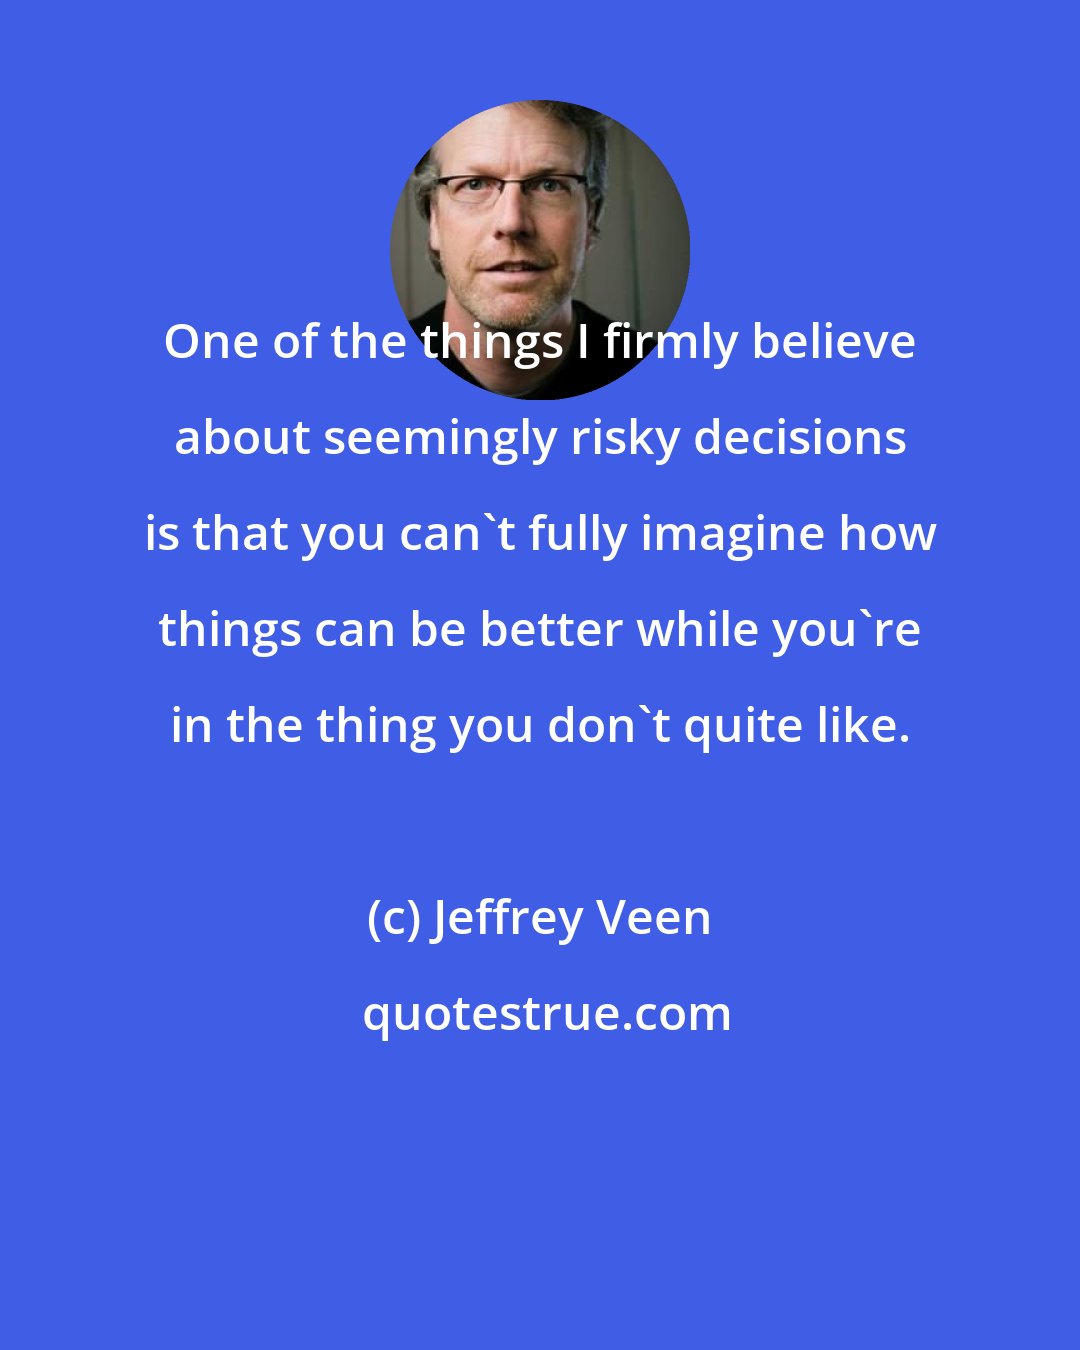 Jeffrey Veen: One of the things I firmly believe about seemingly risky decisions is that you can't fully imagine how things can be better while you're in the thing you don't quite like.